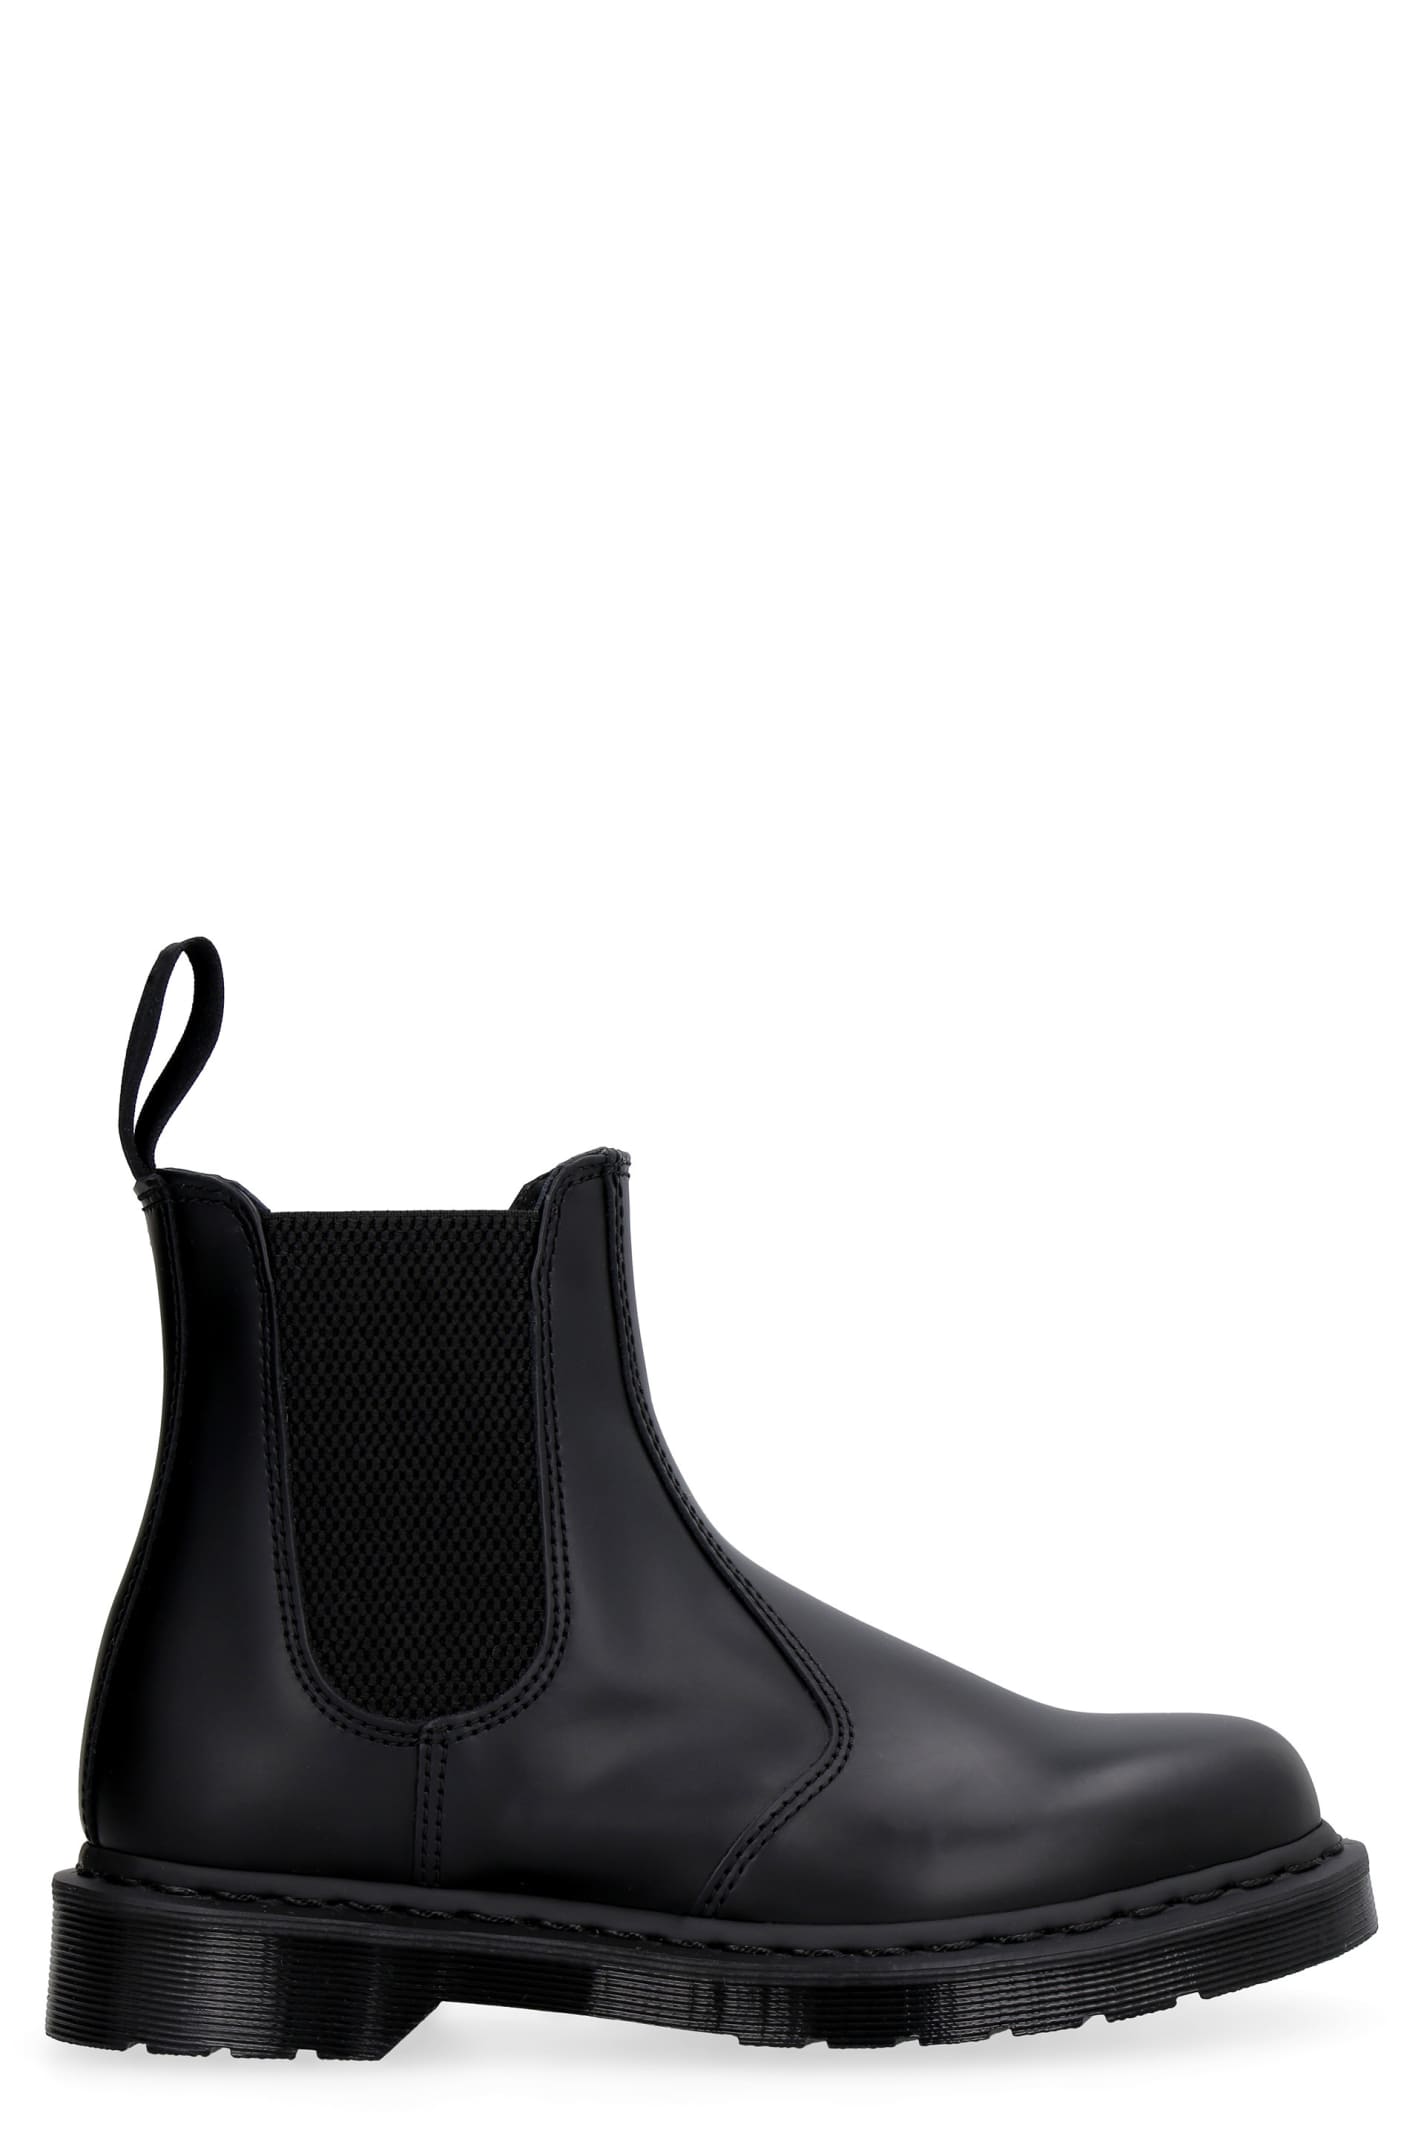 Buy Dr. Martens 2976 Leather Chelsea-boots online, shop Dr. Martens shoes with free shipping